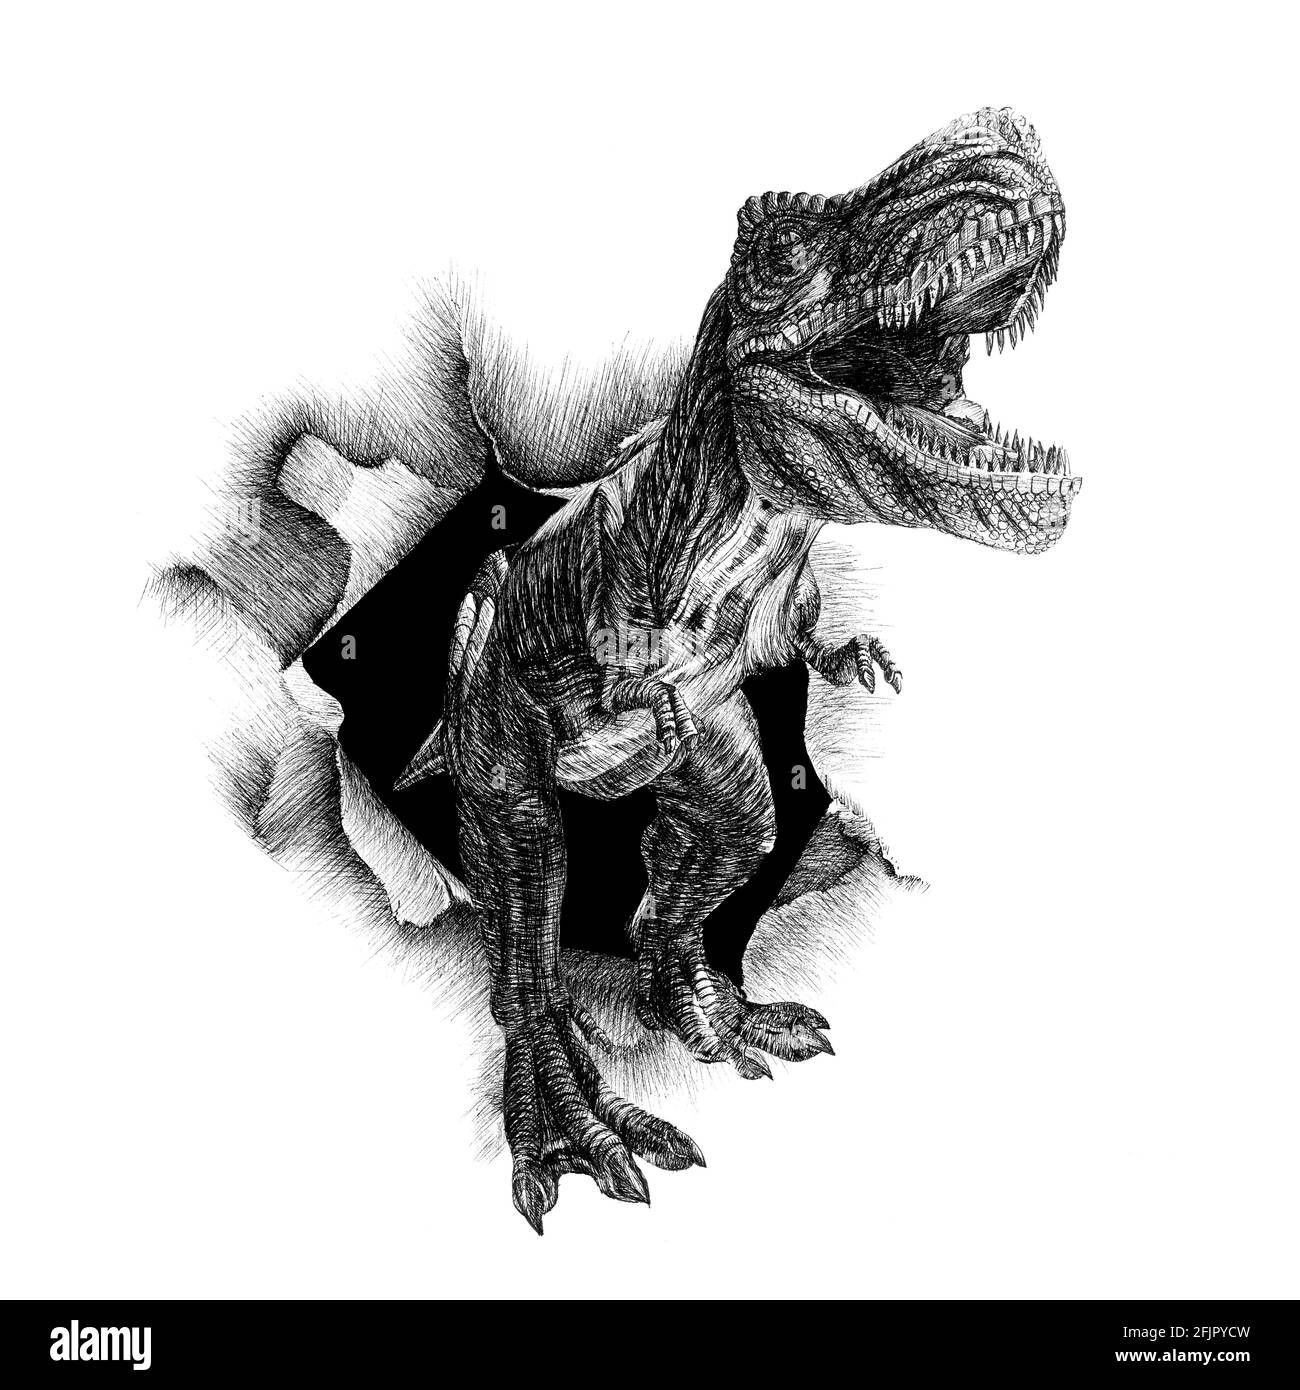 Hand drawn torn paper with dinosaur, sketch graphics monochrome illustration on white background (originals, no tracing) Stock Photo